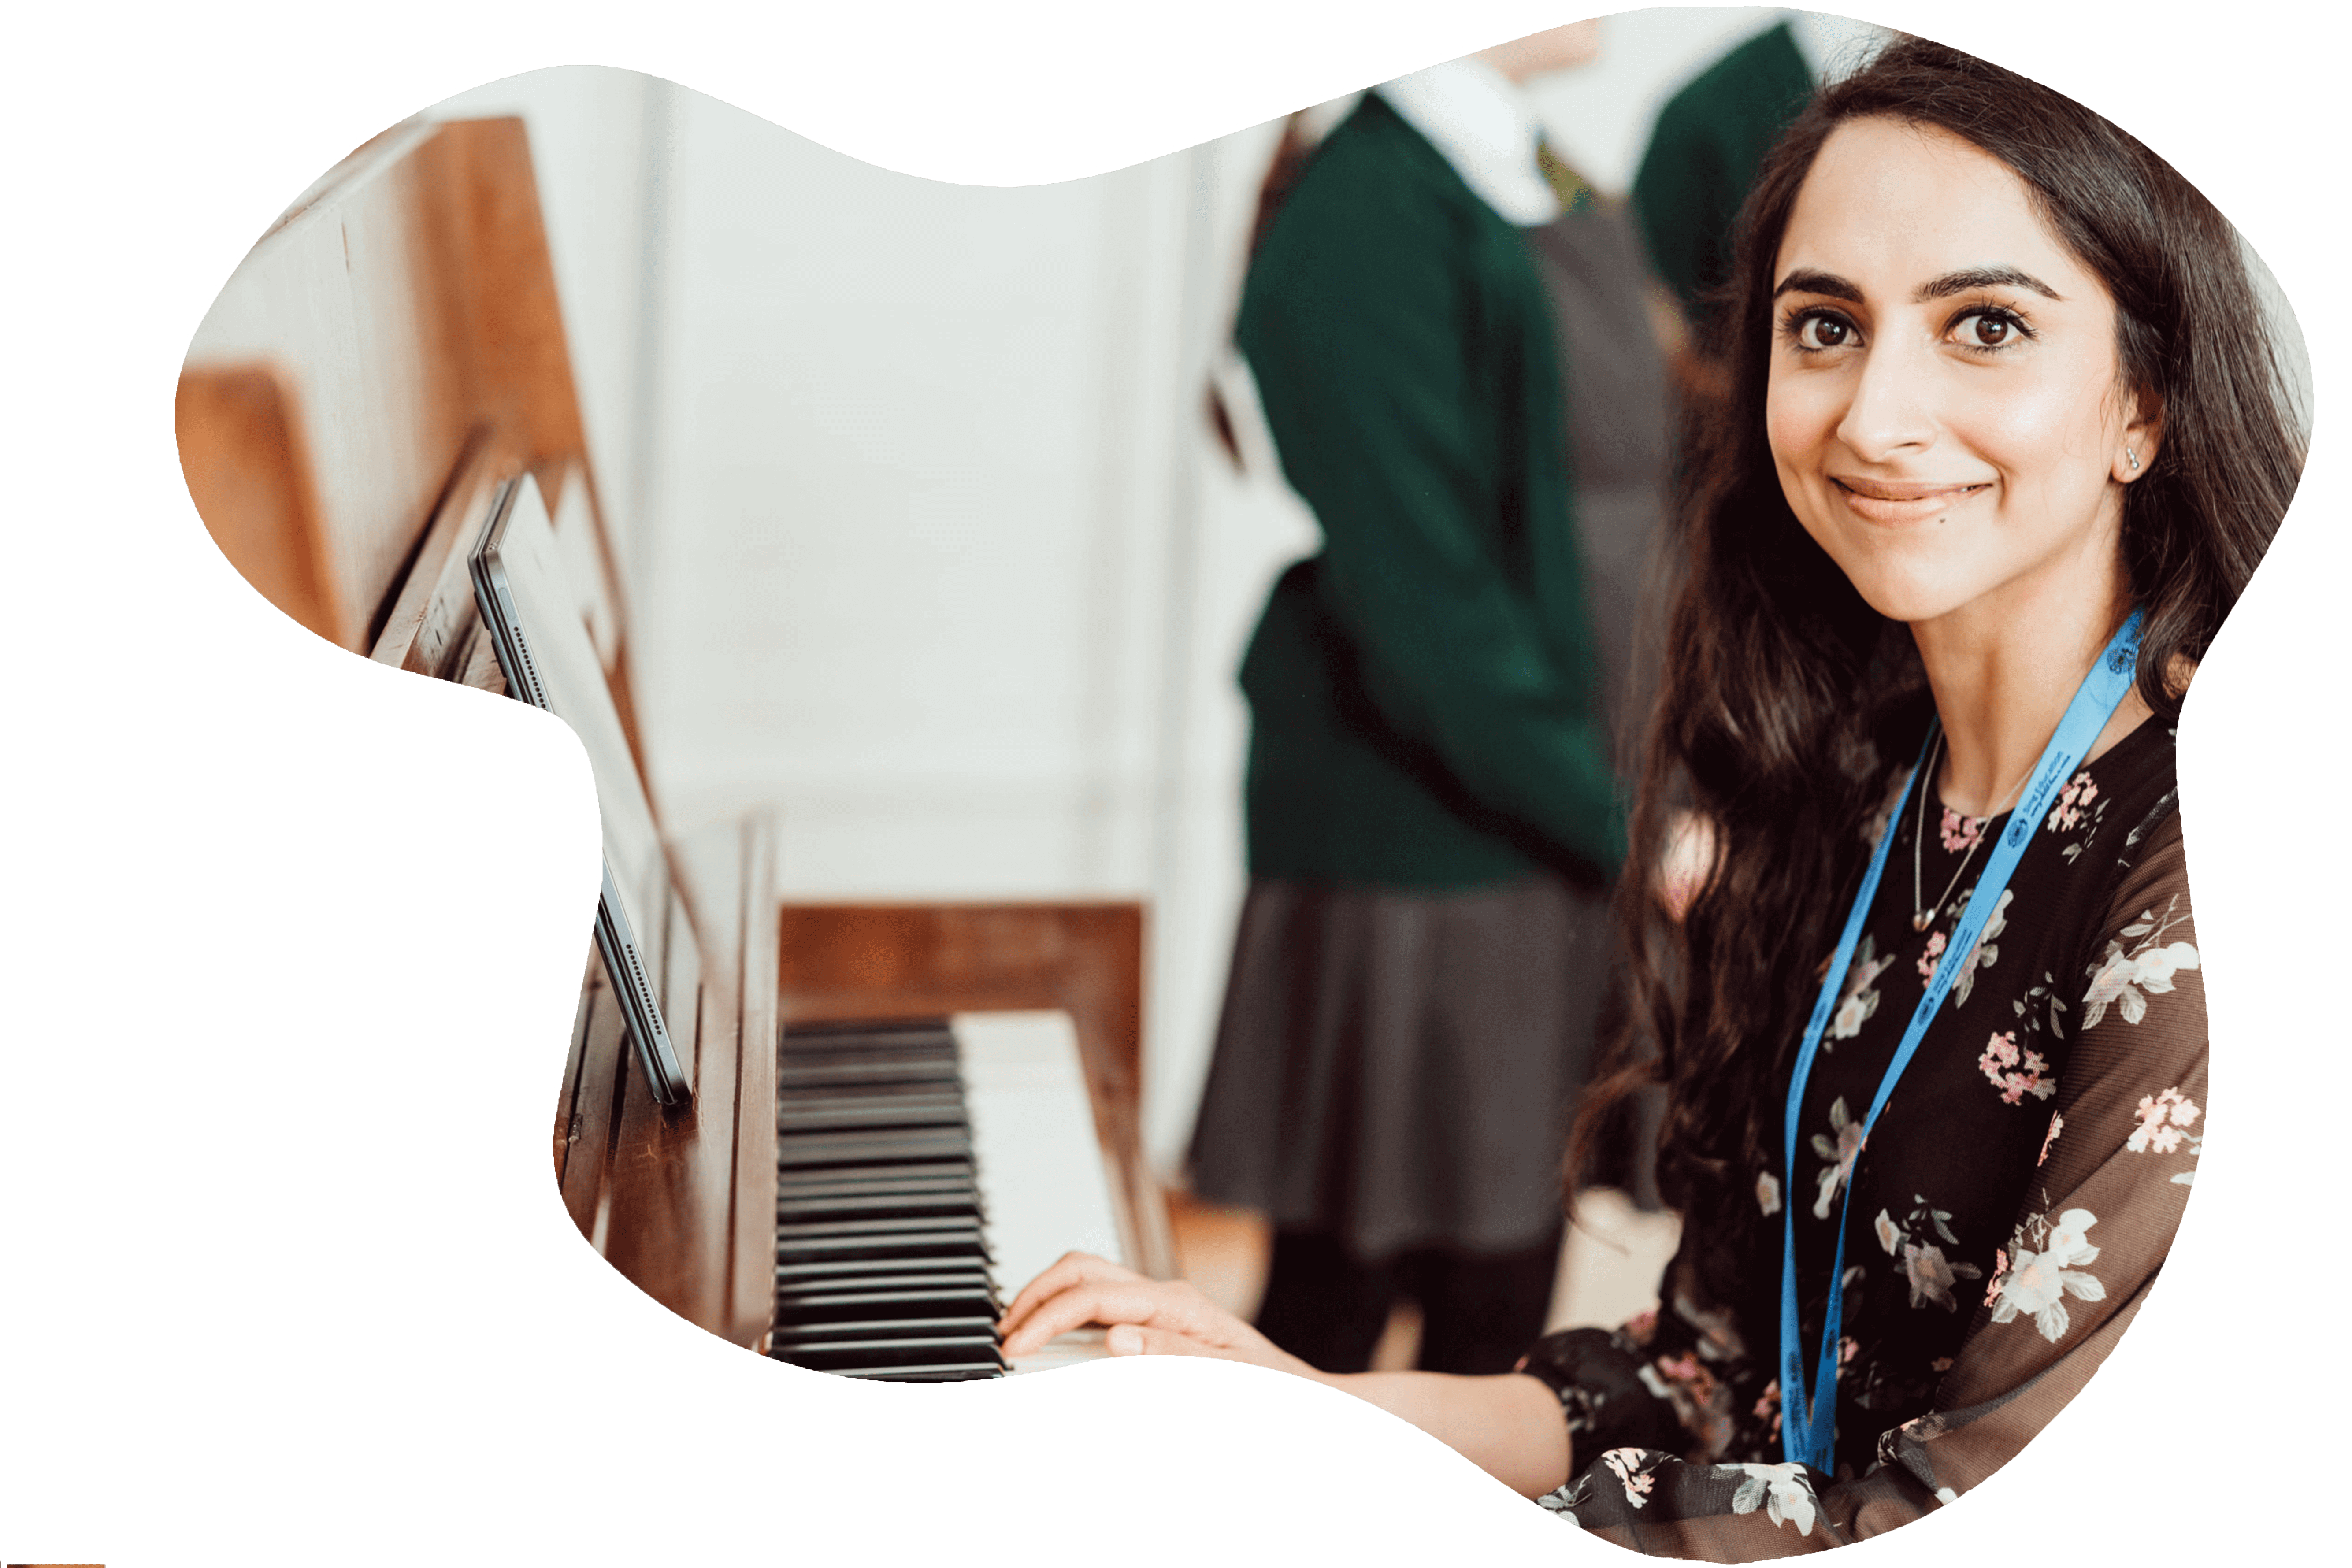 A smiling woman with a lanyard sits at a piano, her hands poised on the keys, ready to play. Behind her, the blurred figure of a student in a green school uniform suggests a classroom setting, emphasizing the educational and musical context of the scene. The woman's engaging expression and the presence of the piano highlight the interactive and creative nature of the learning environment.